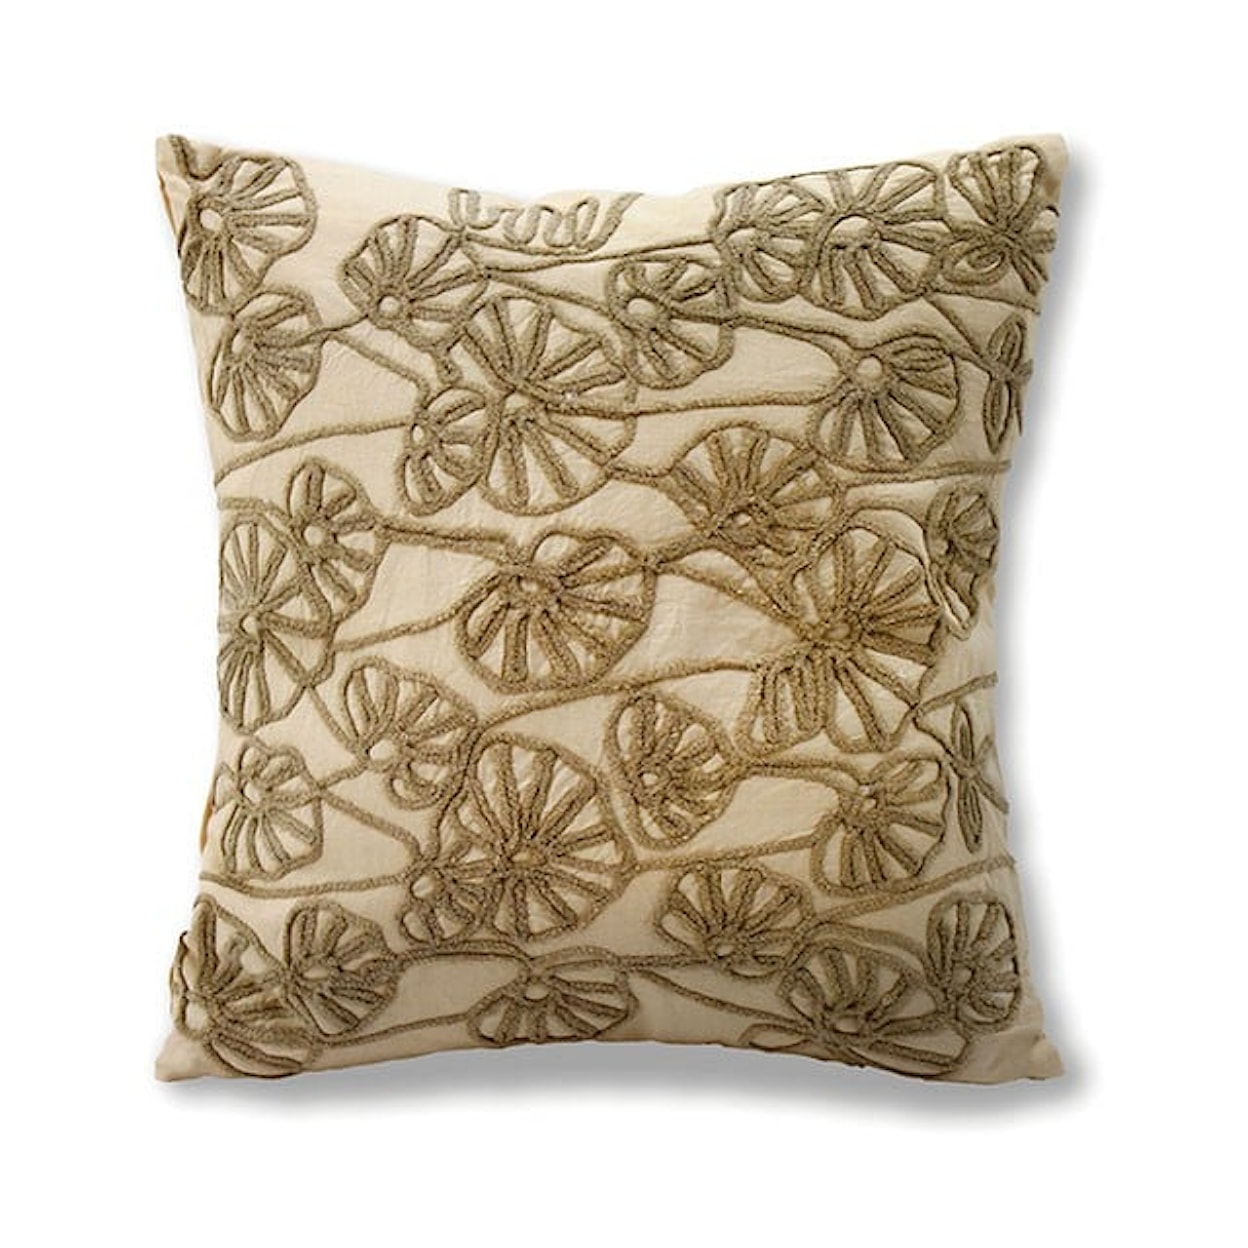 Furniture of America Ines Throw Pillow